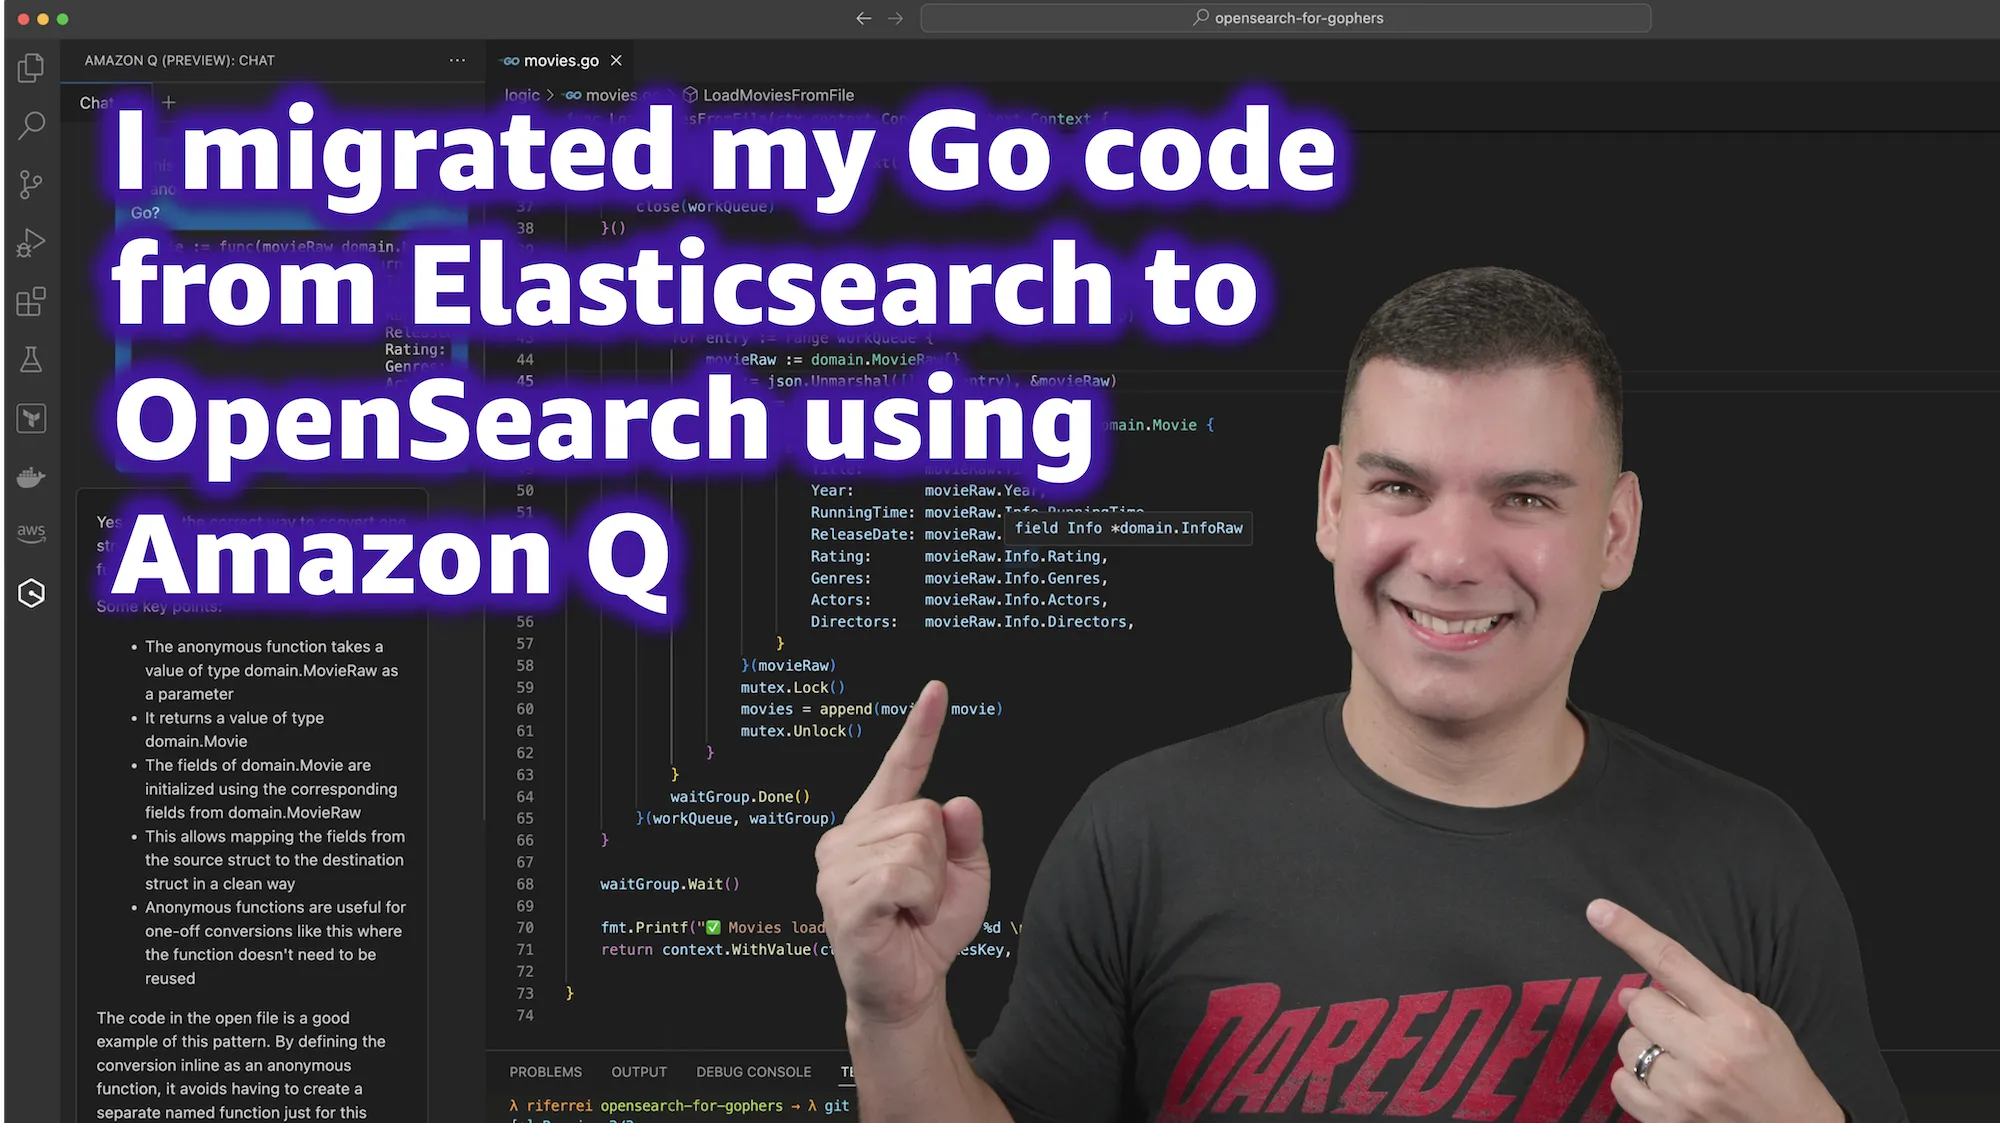 Goodbye Elasticsearch, Hello OpenSearch: A Golang Developer's Journey with Amazon Q (Lessons Learned)